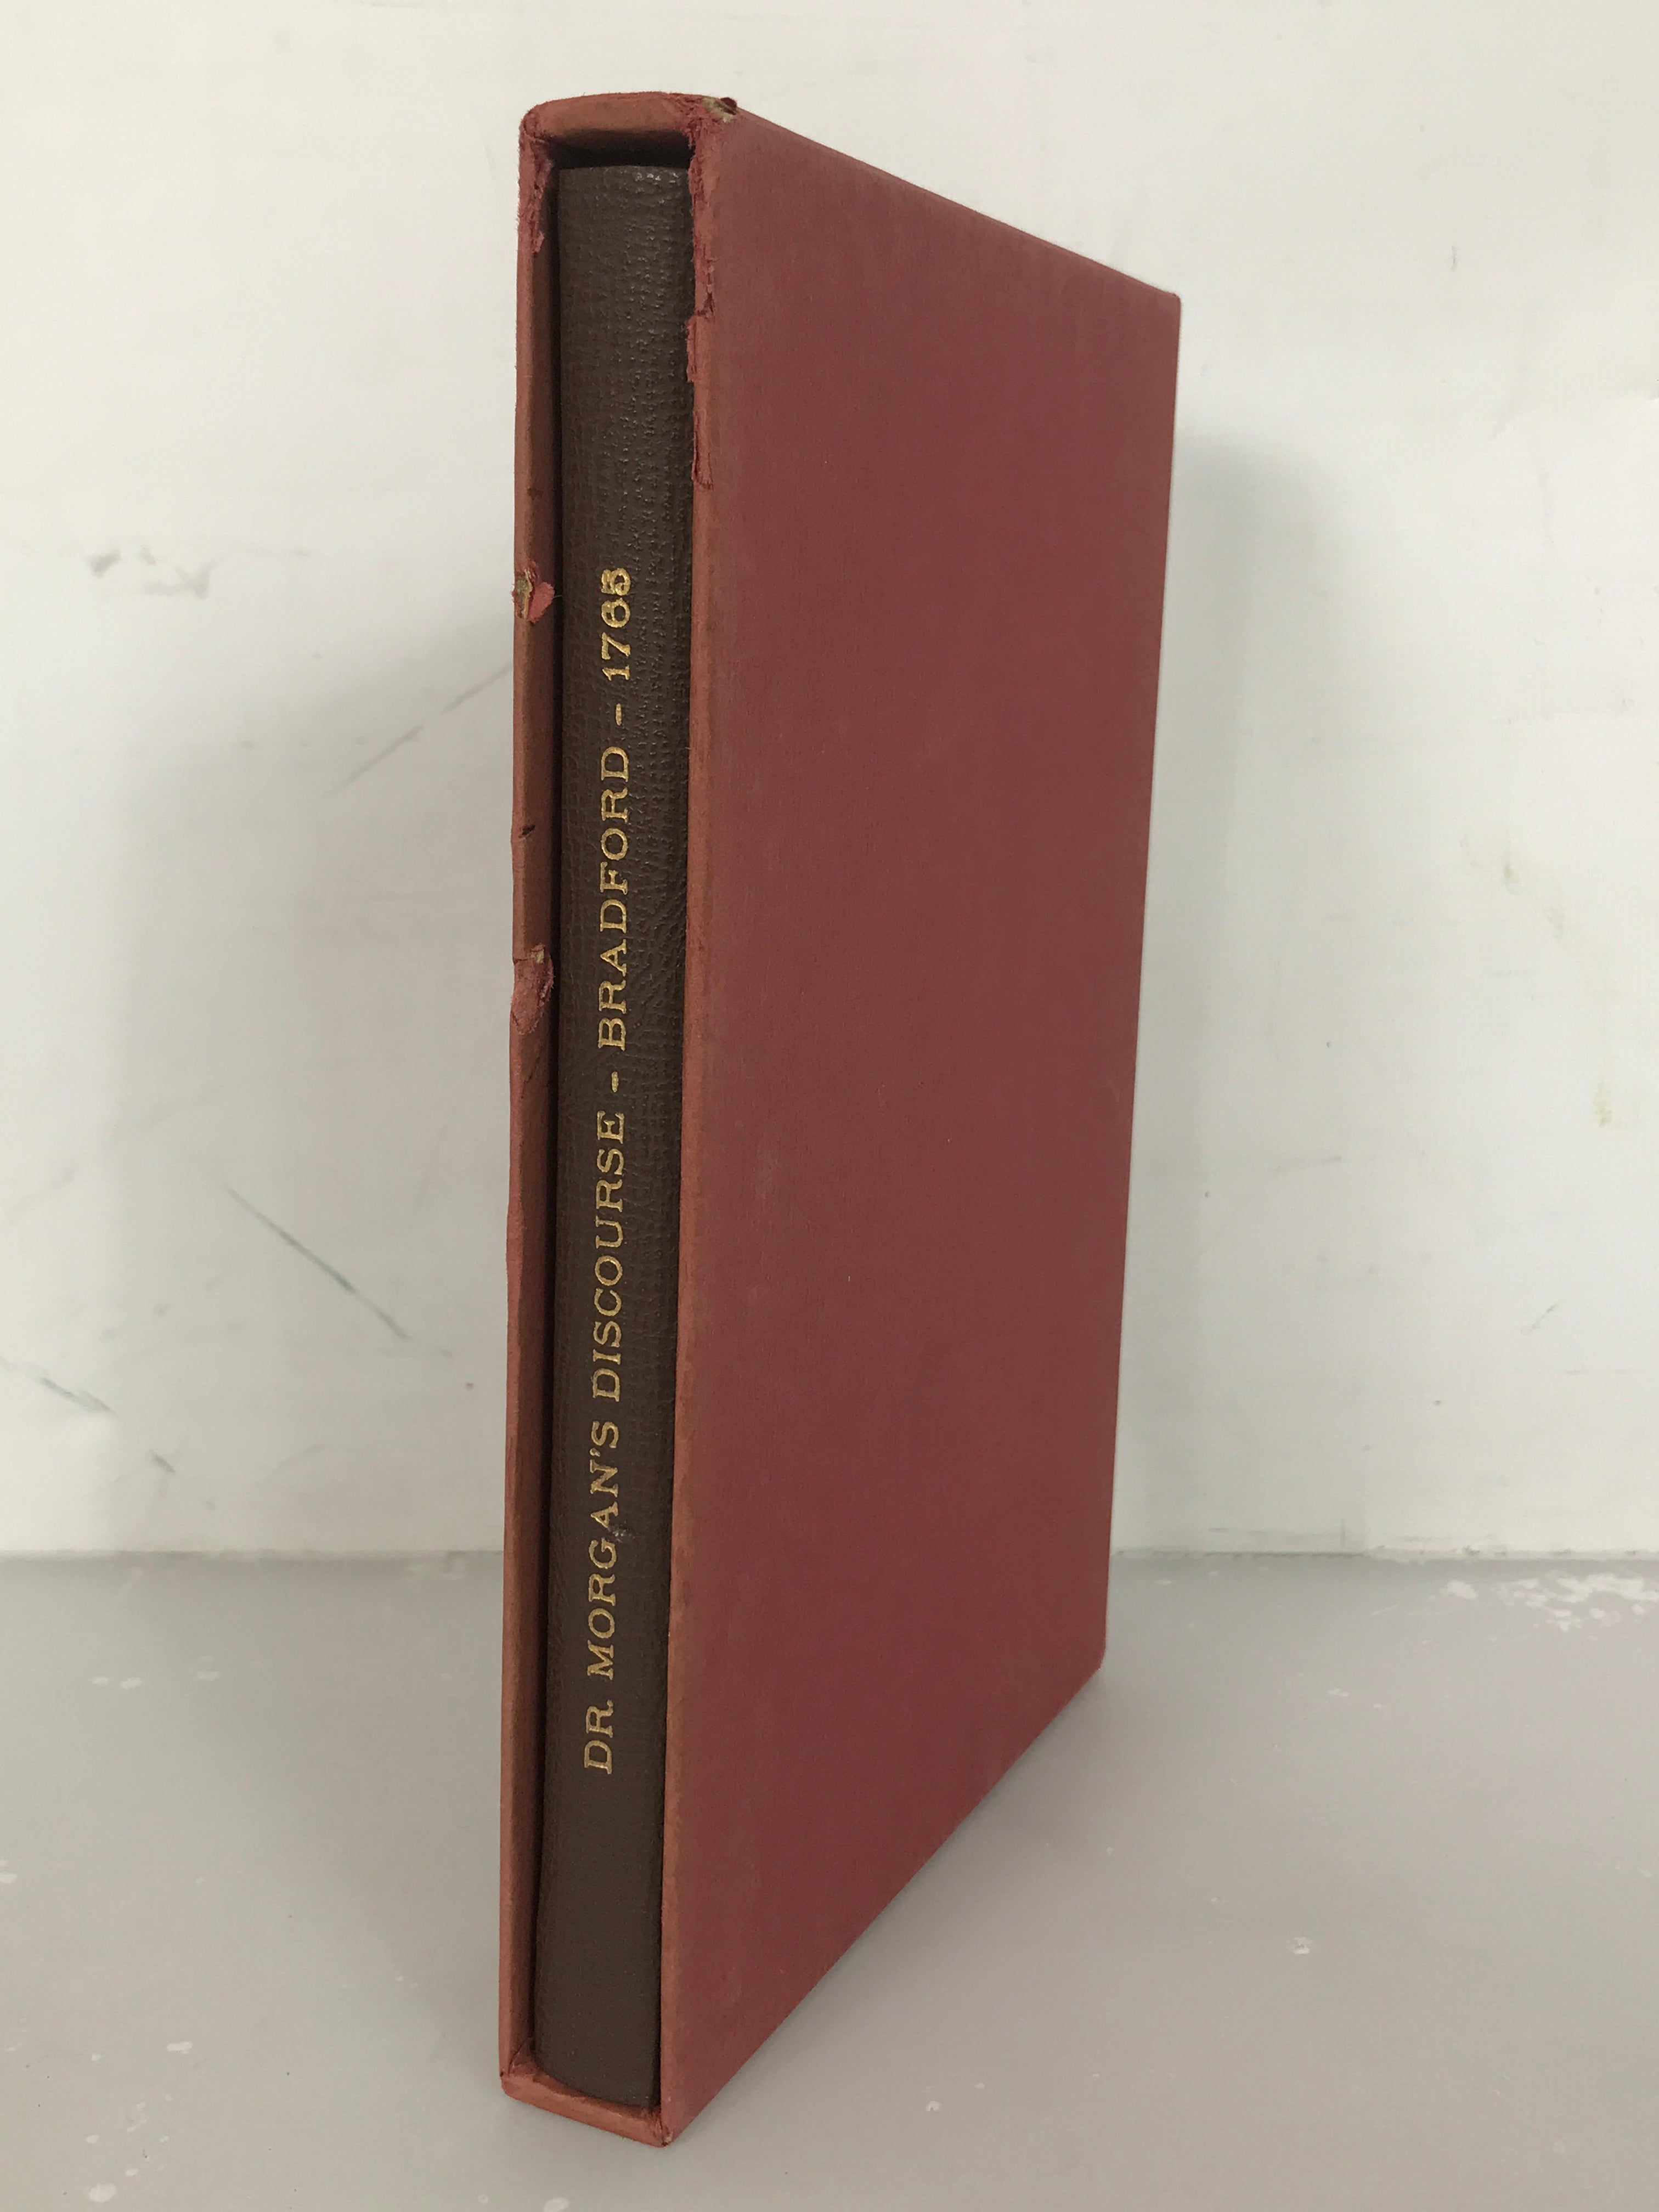 Dr. Morgan's Discourse Upon the Institution of Medical Schools in America 1965 Reprint of a 1765 Book HC Slipcase